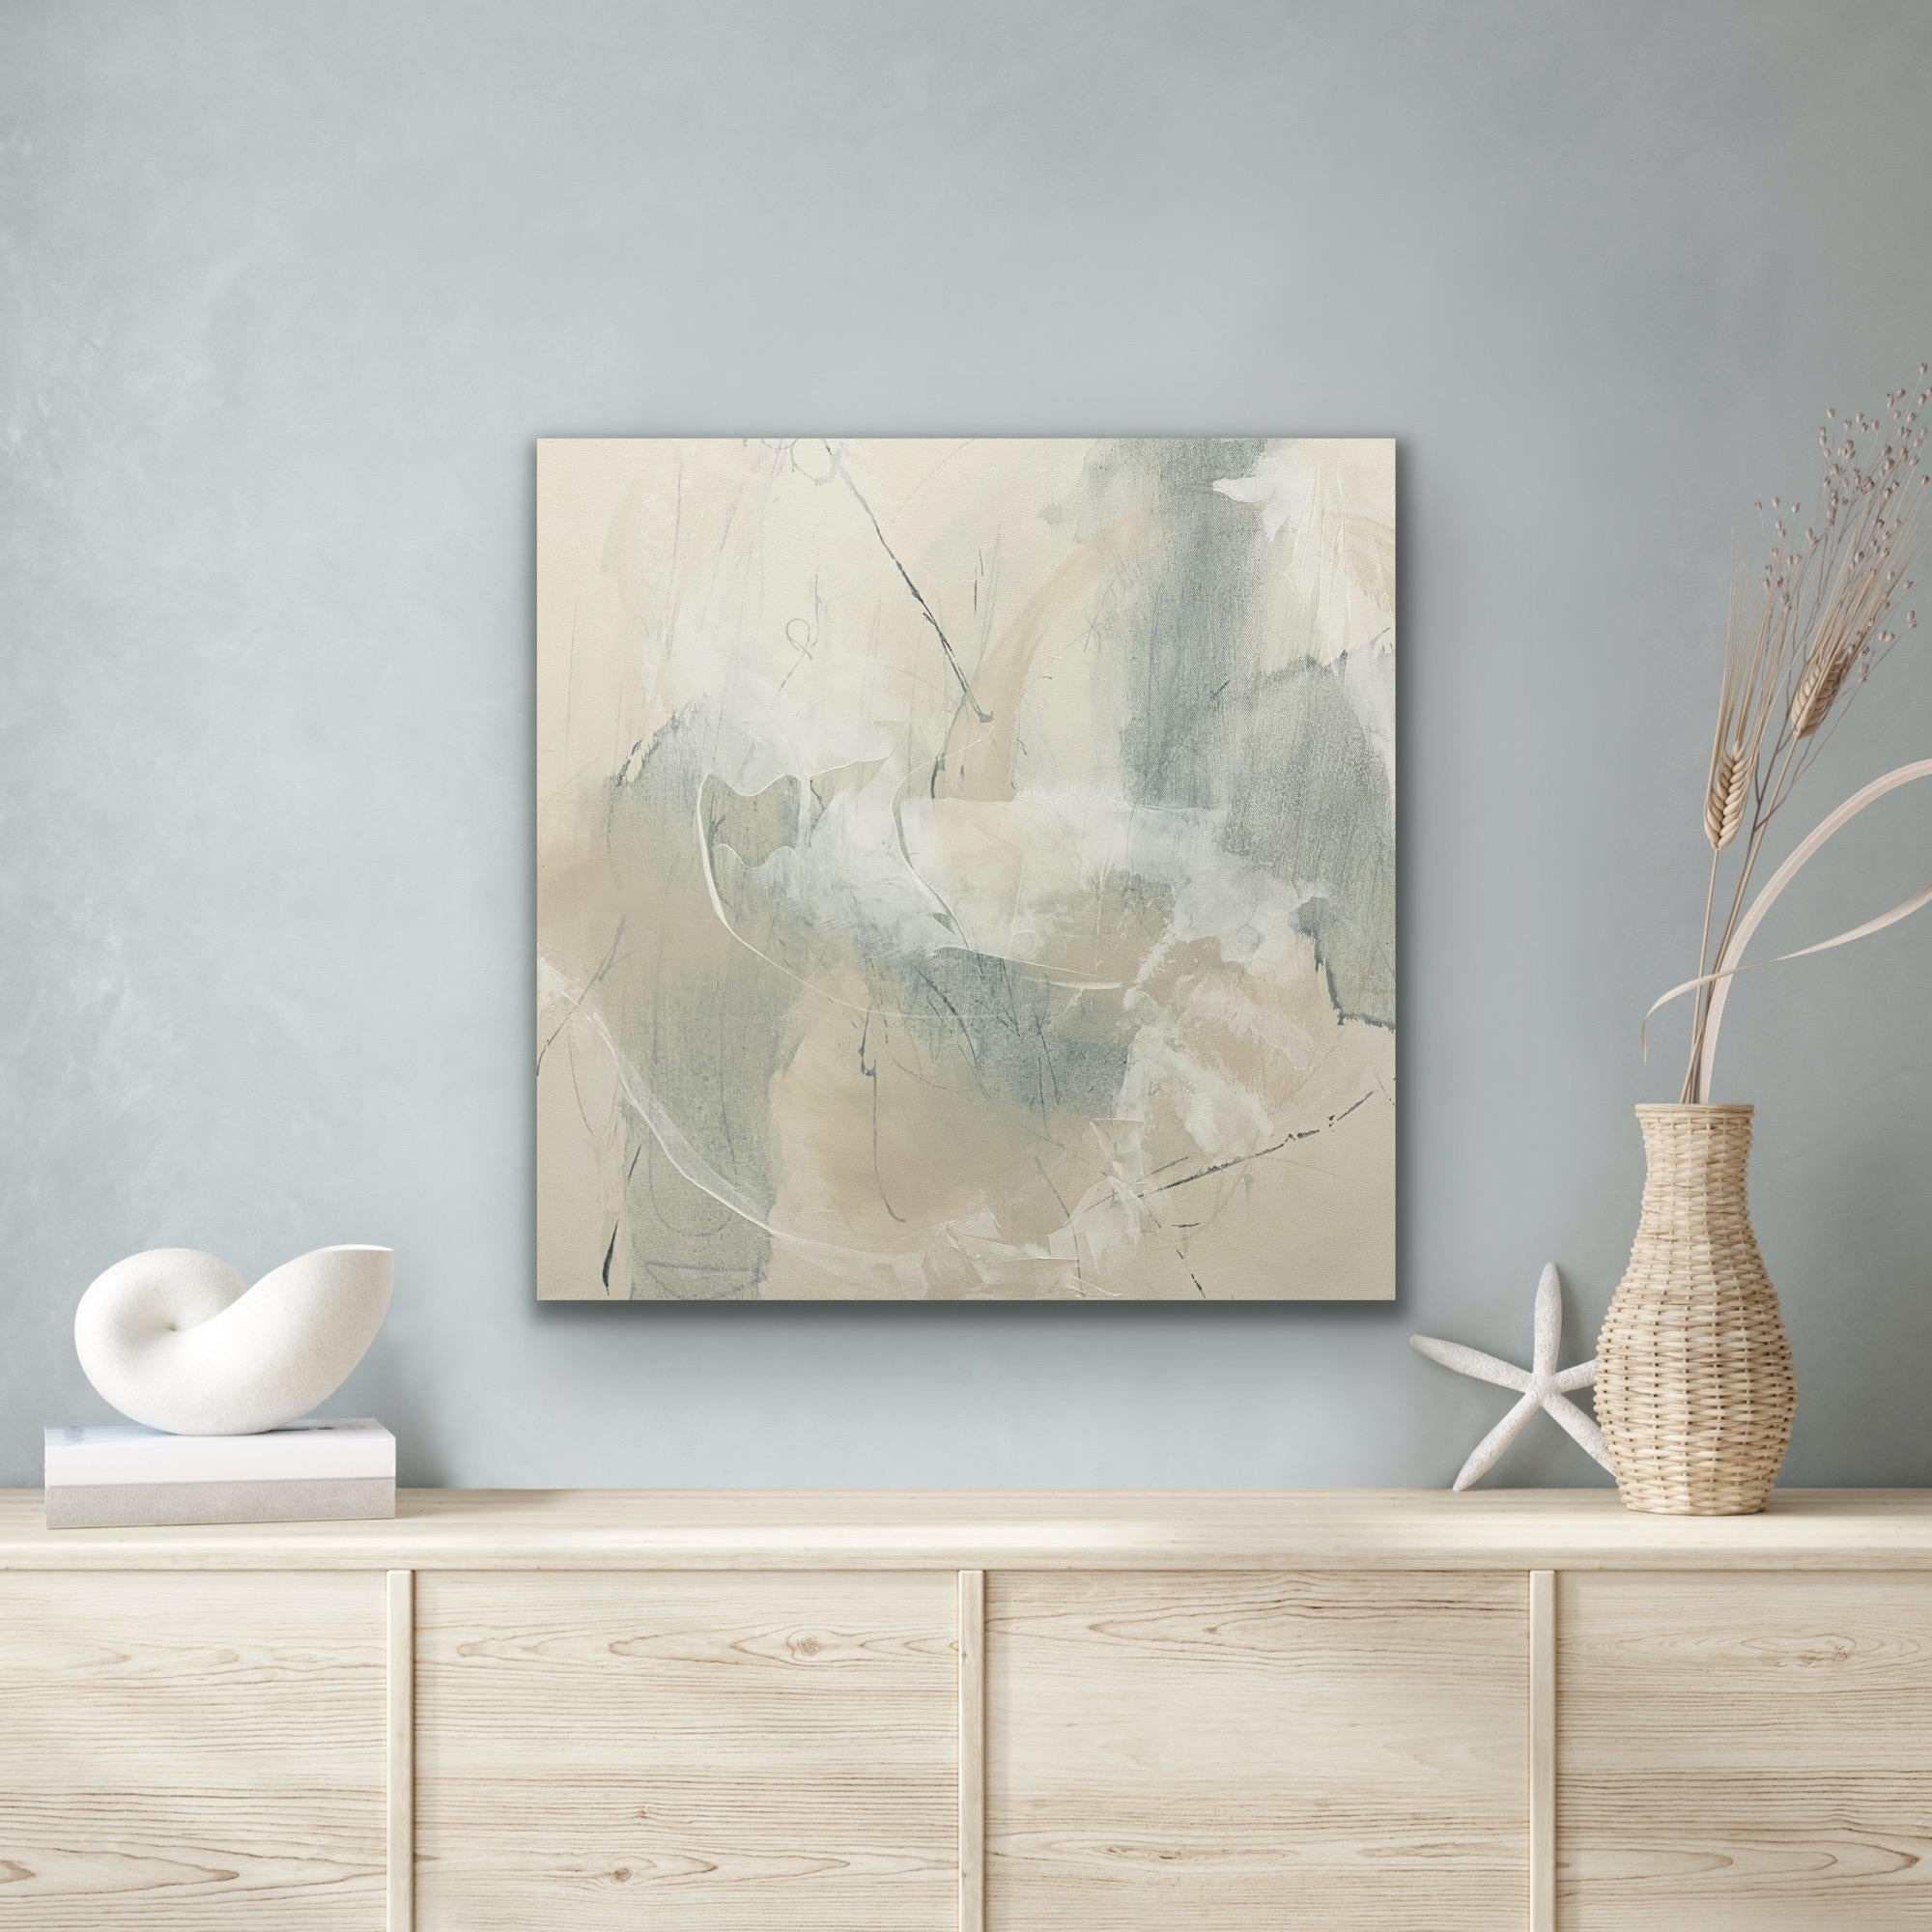 Articulate 5, contemporary abstract, seafoam, tan, white 24x24 inches For Sale 7